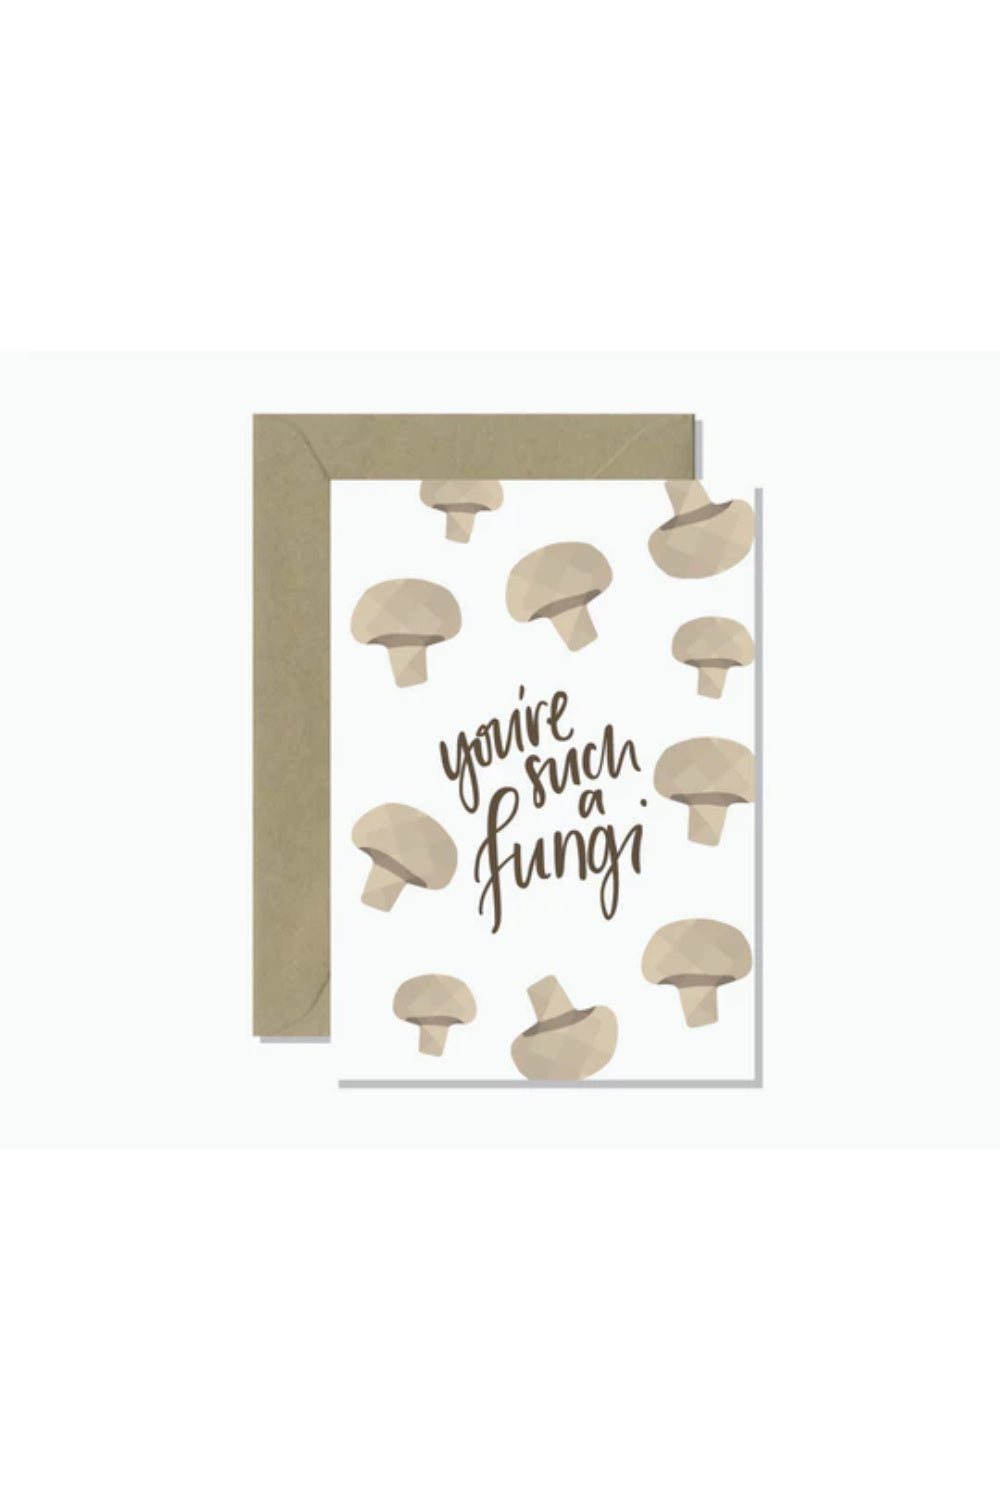 YOU'RE SUCH A FUNGI GREETING CARD